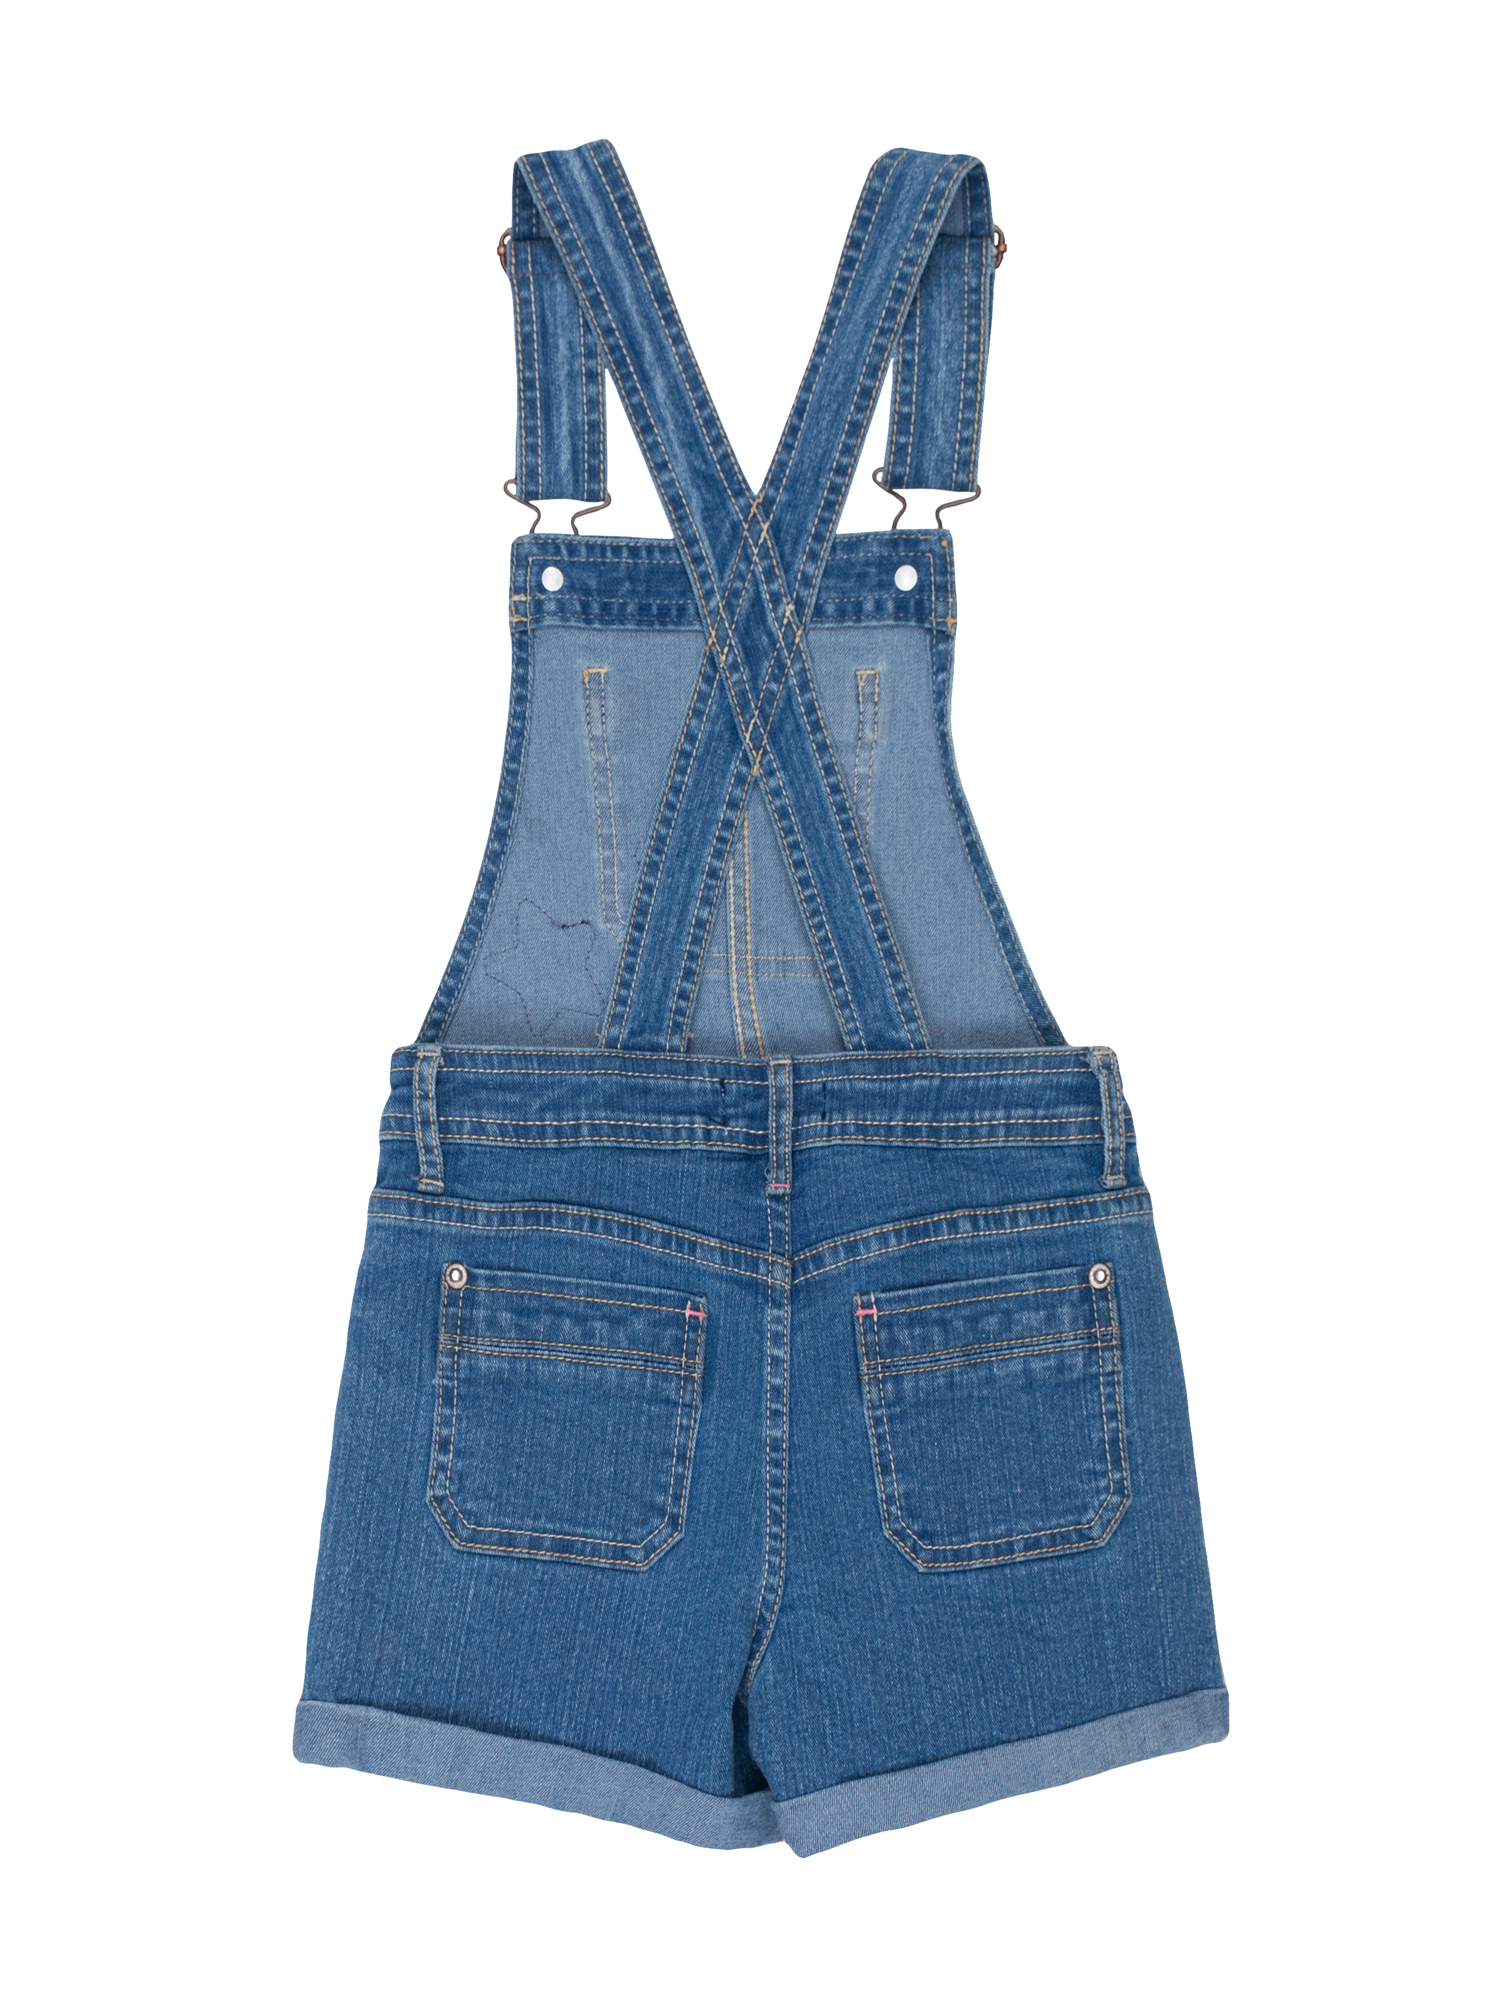 Jordache Rolled Cuff Embellished Overall Short (Little Girls & Big Girls) - image 2 of 2